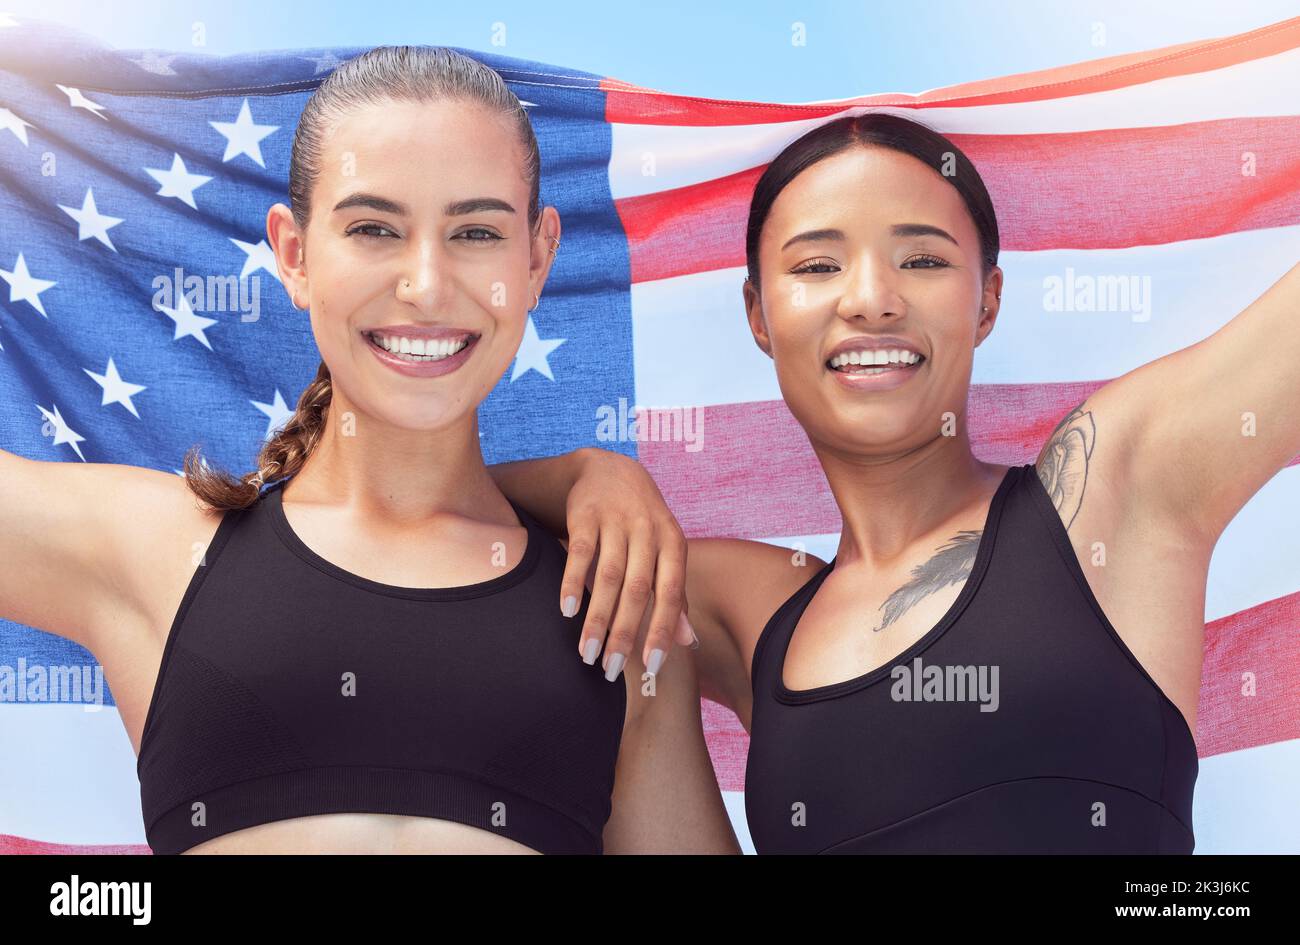 American flag, women and athlete portrait smile, freedom and justice patriotic symbol for female athletes. Teamwork, collaboration and sports girls Stock Photo